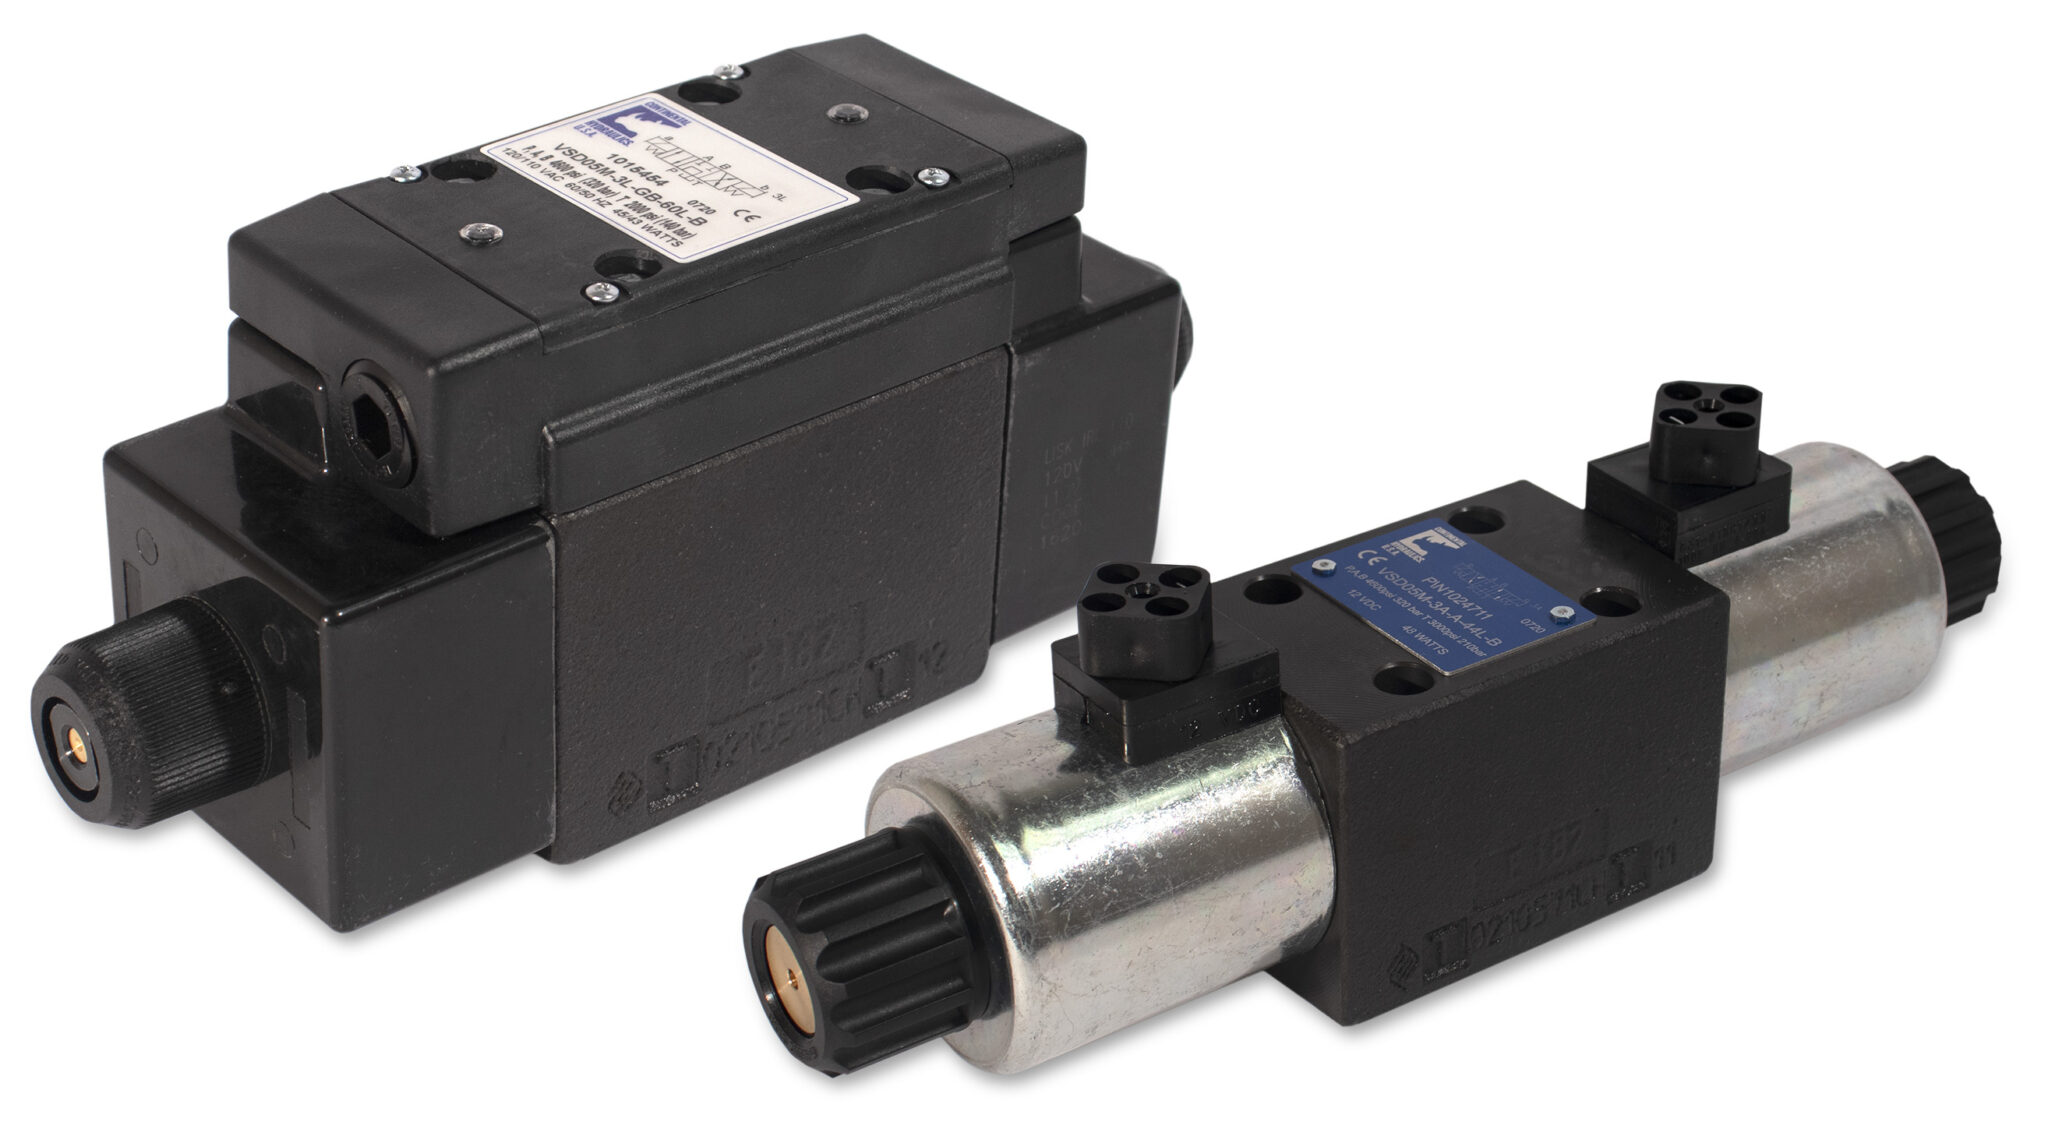 VSD05M direct operated solenoid valve products; white background